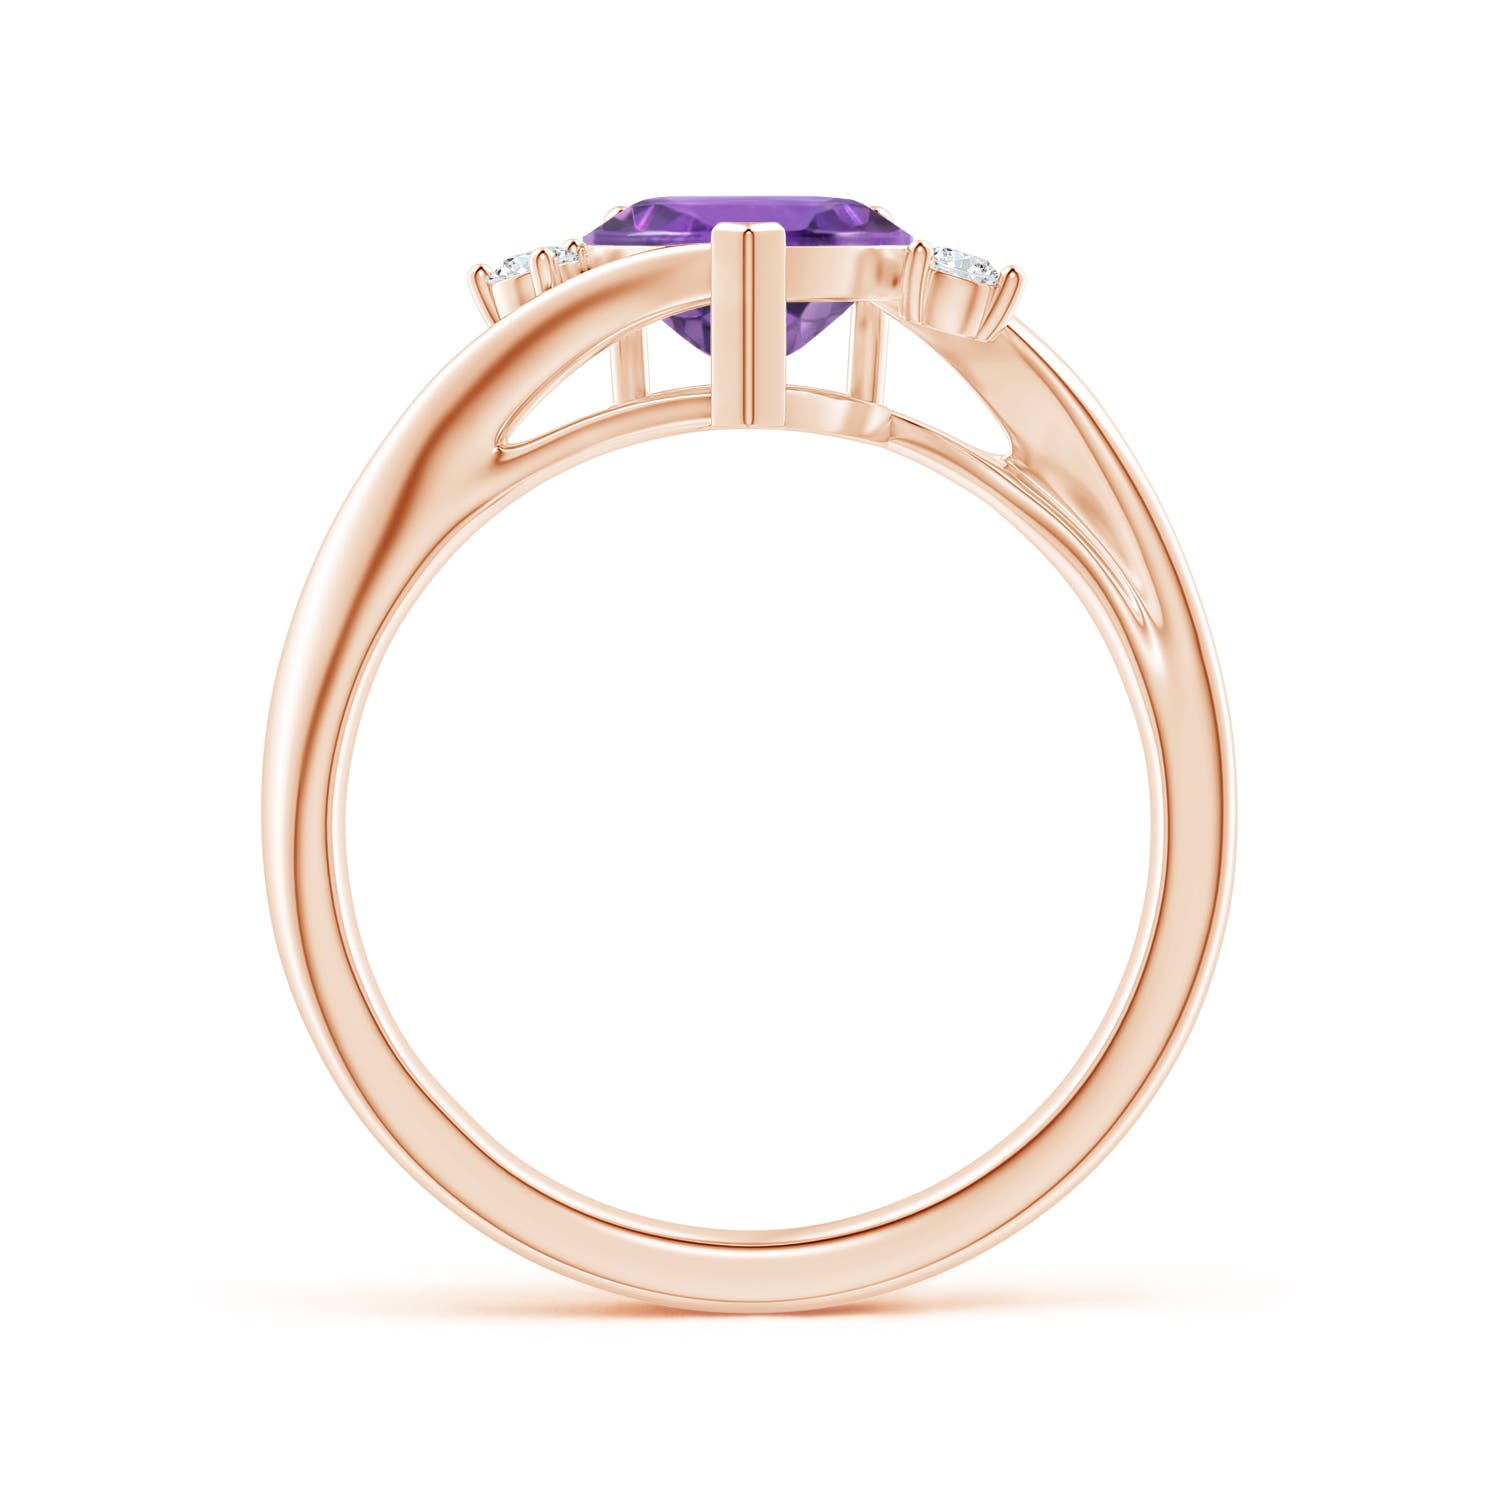 AA - Amethyst / 1.17 CT / 14 KT Rose Gold